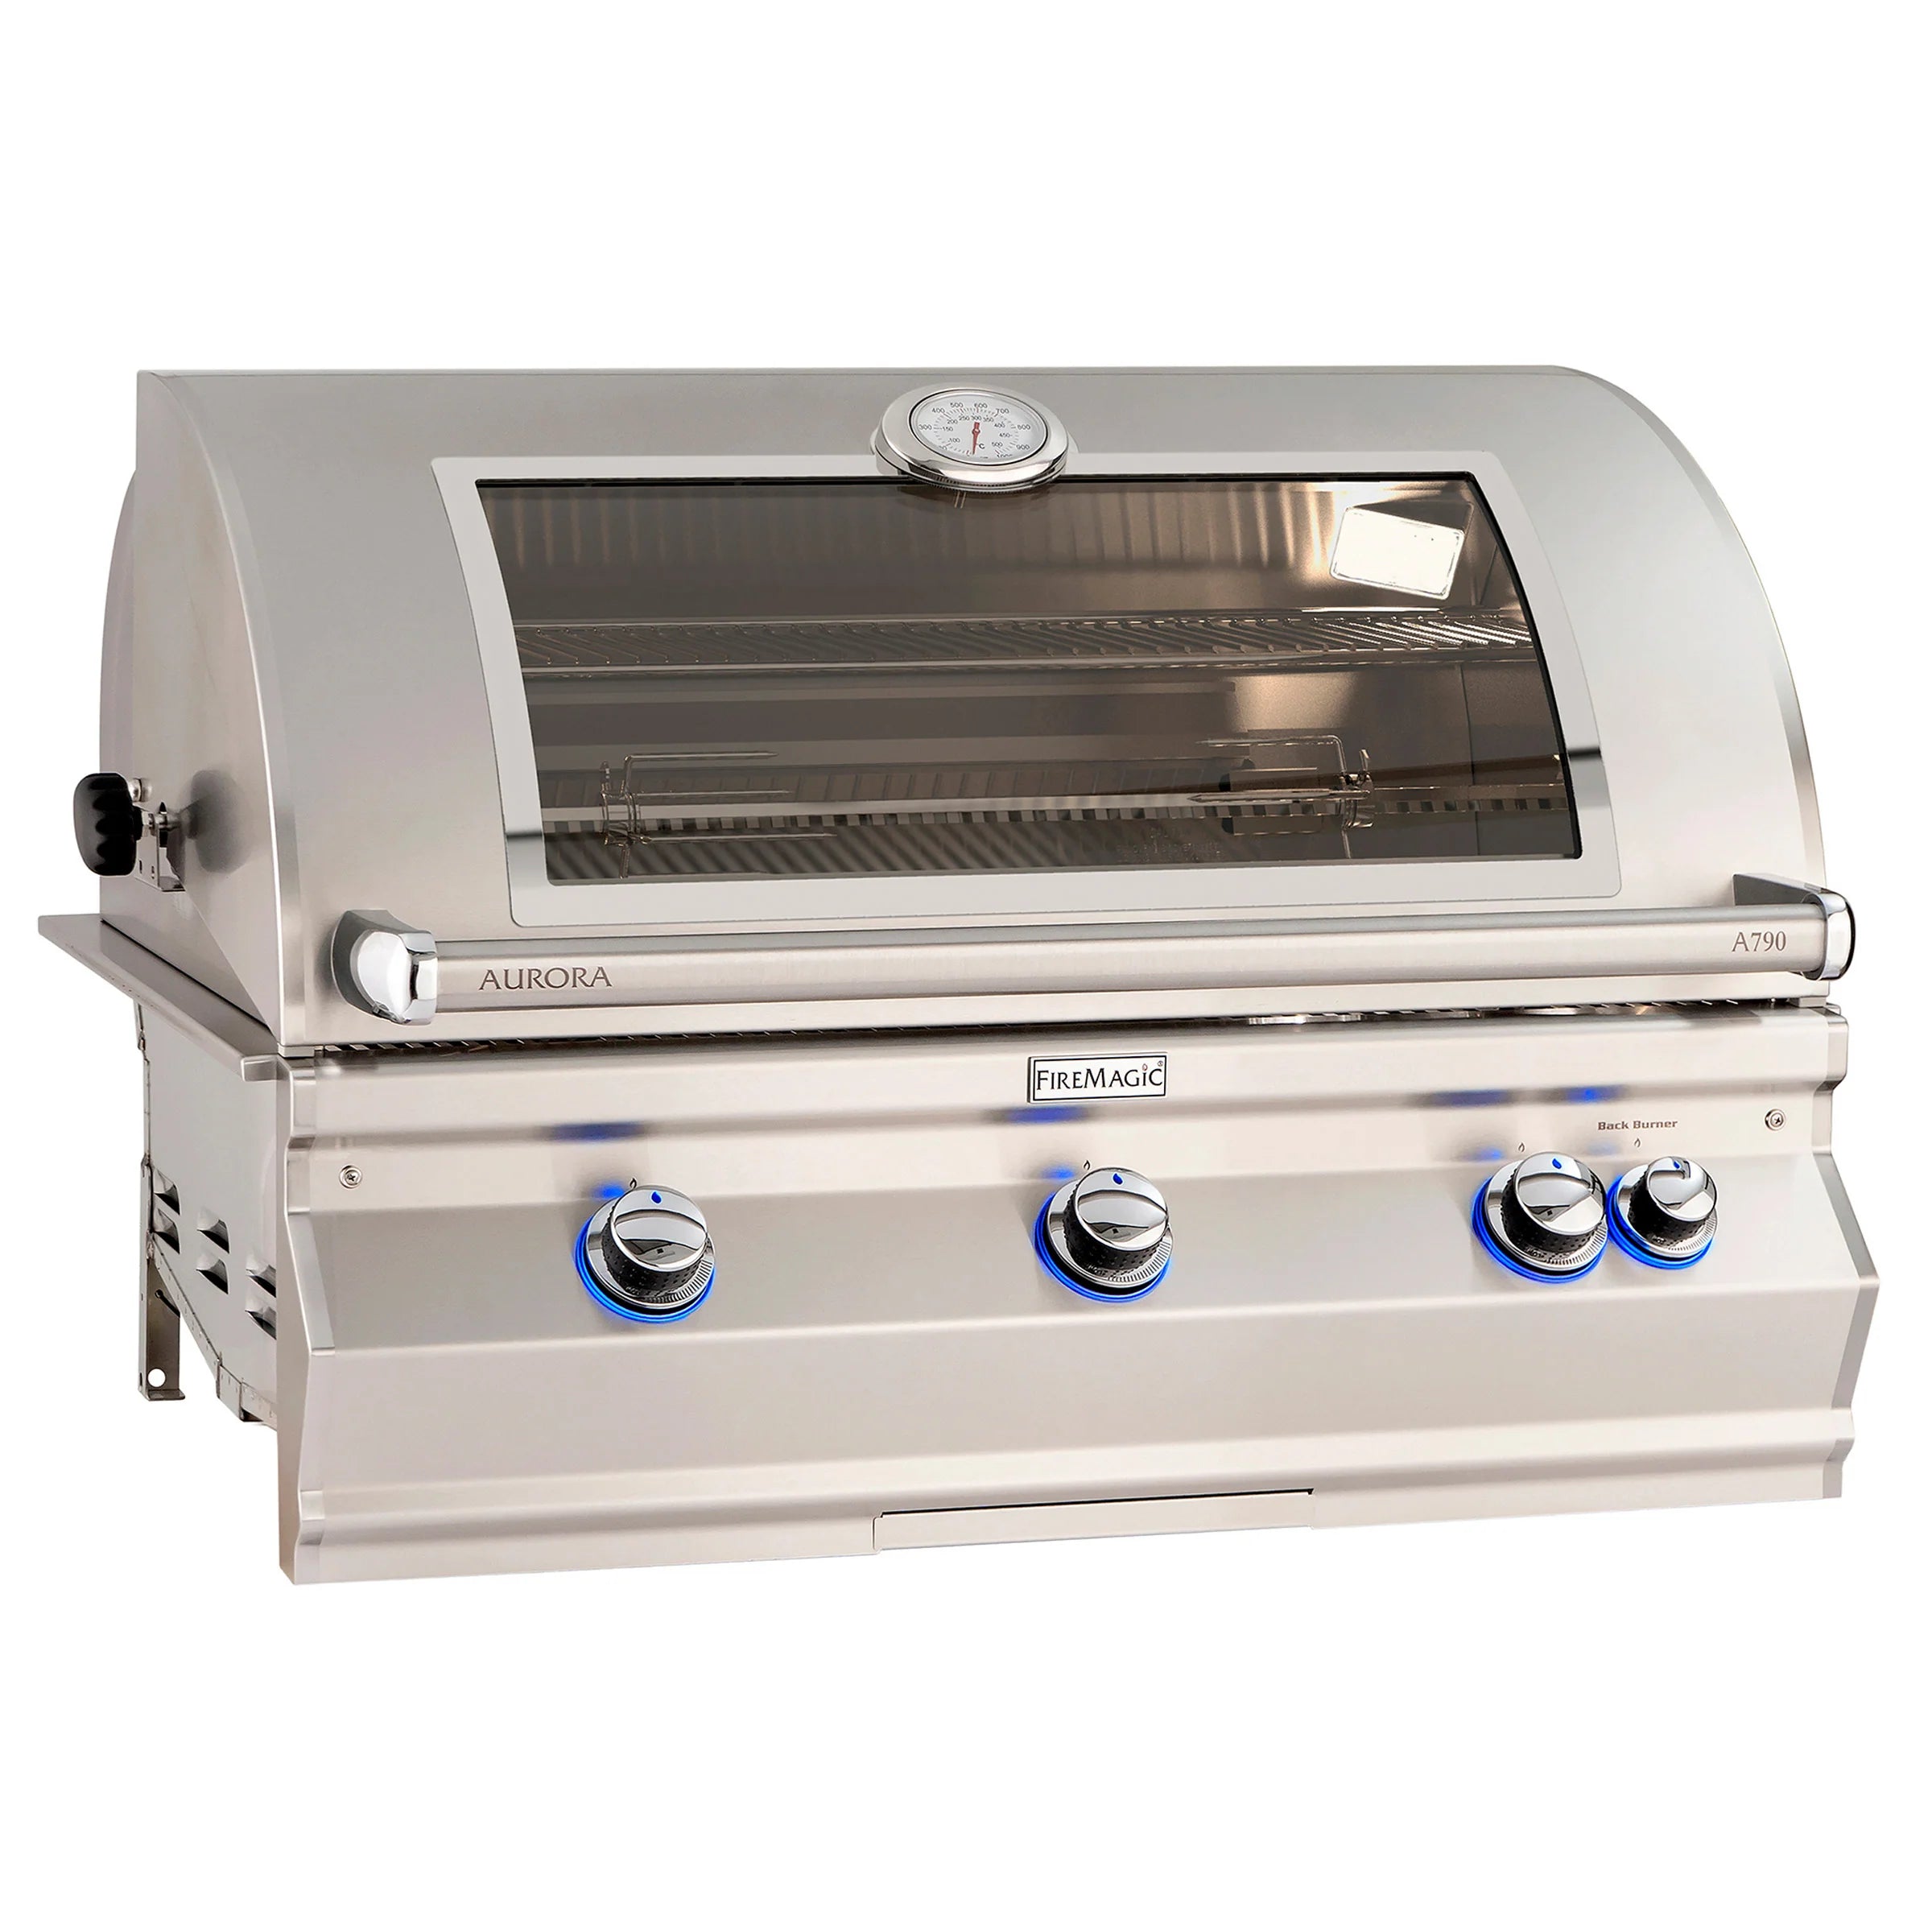 Fire Magic Aurora A790i 36" Built-In Grill Without Rotisserie w/ Window